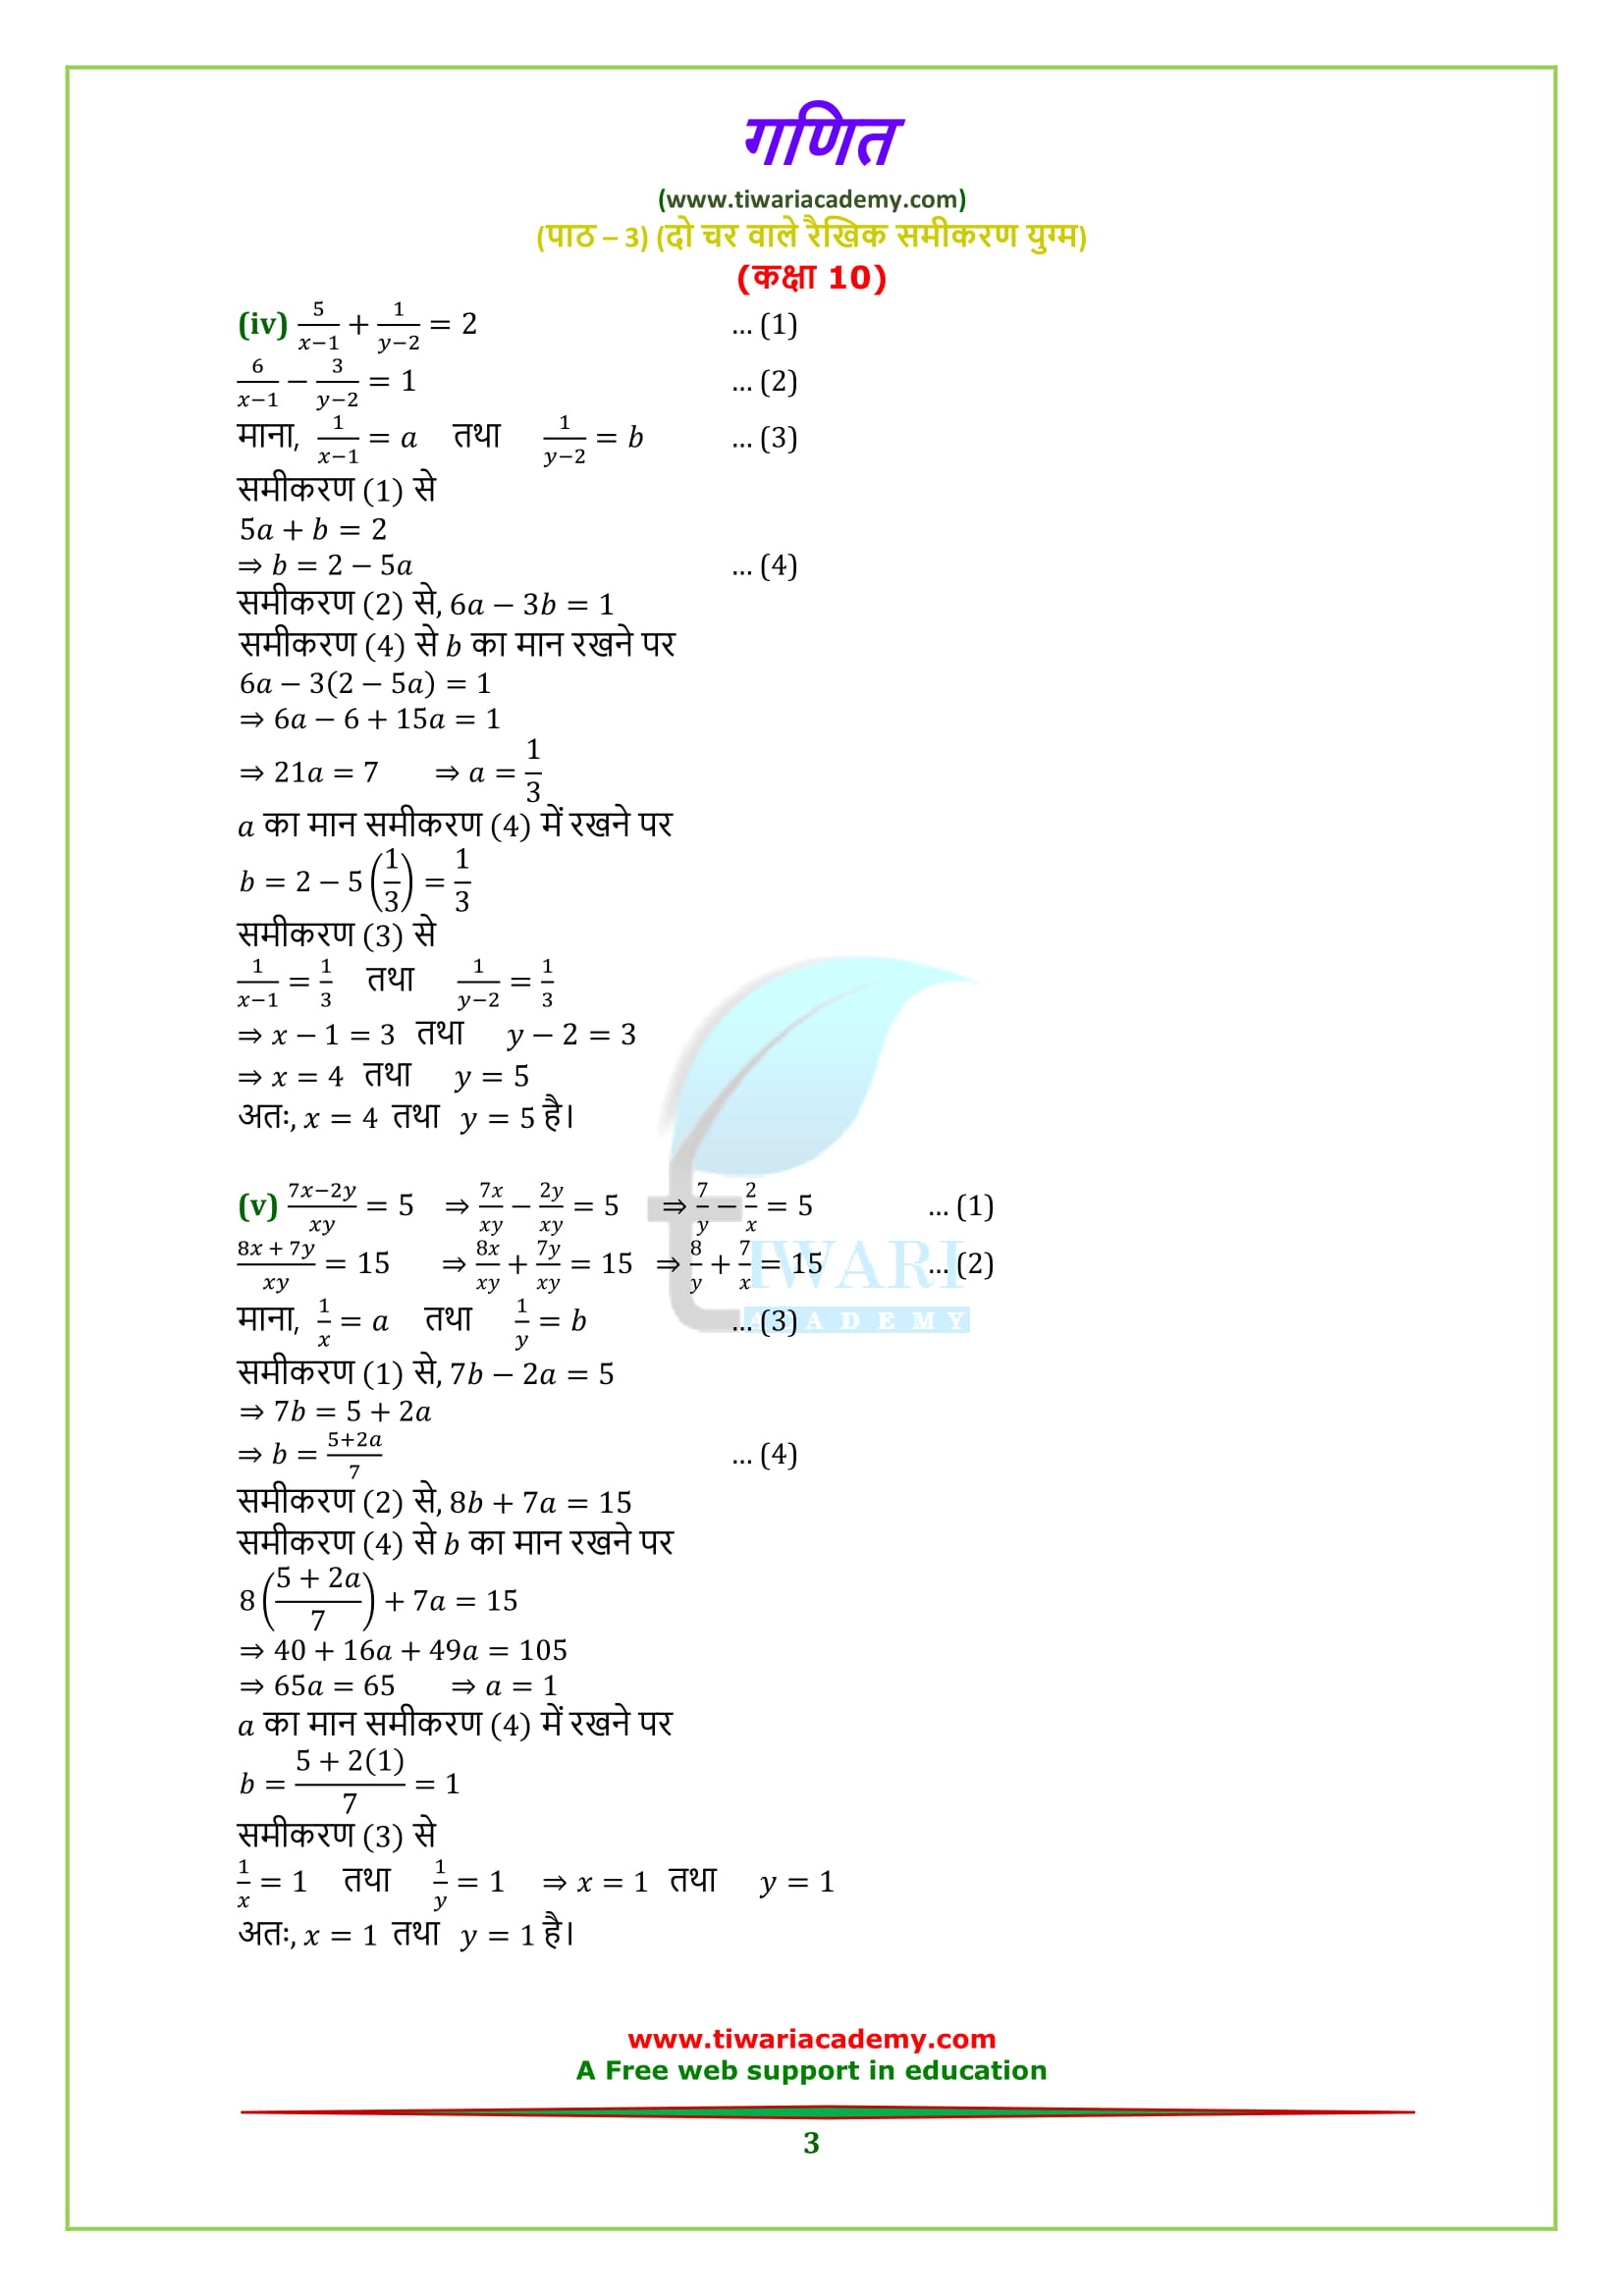 Class 10 maths chapter 3 exercise 3.6 solutions in Hindi